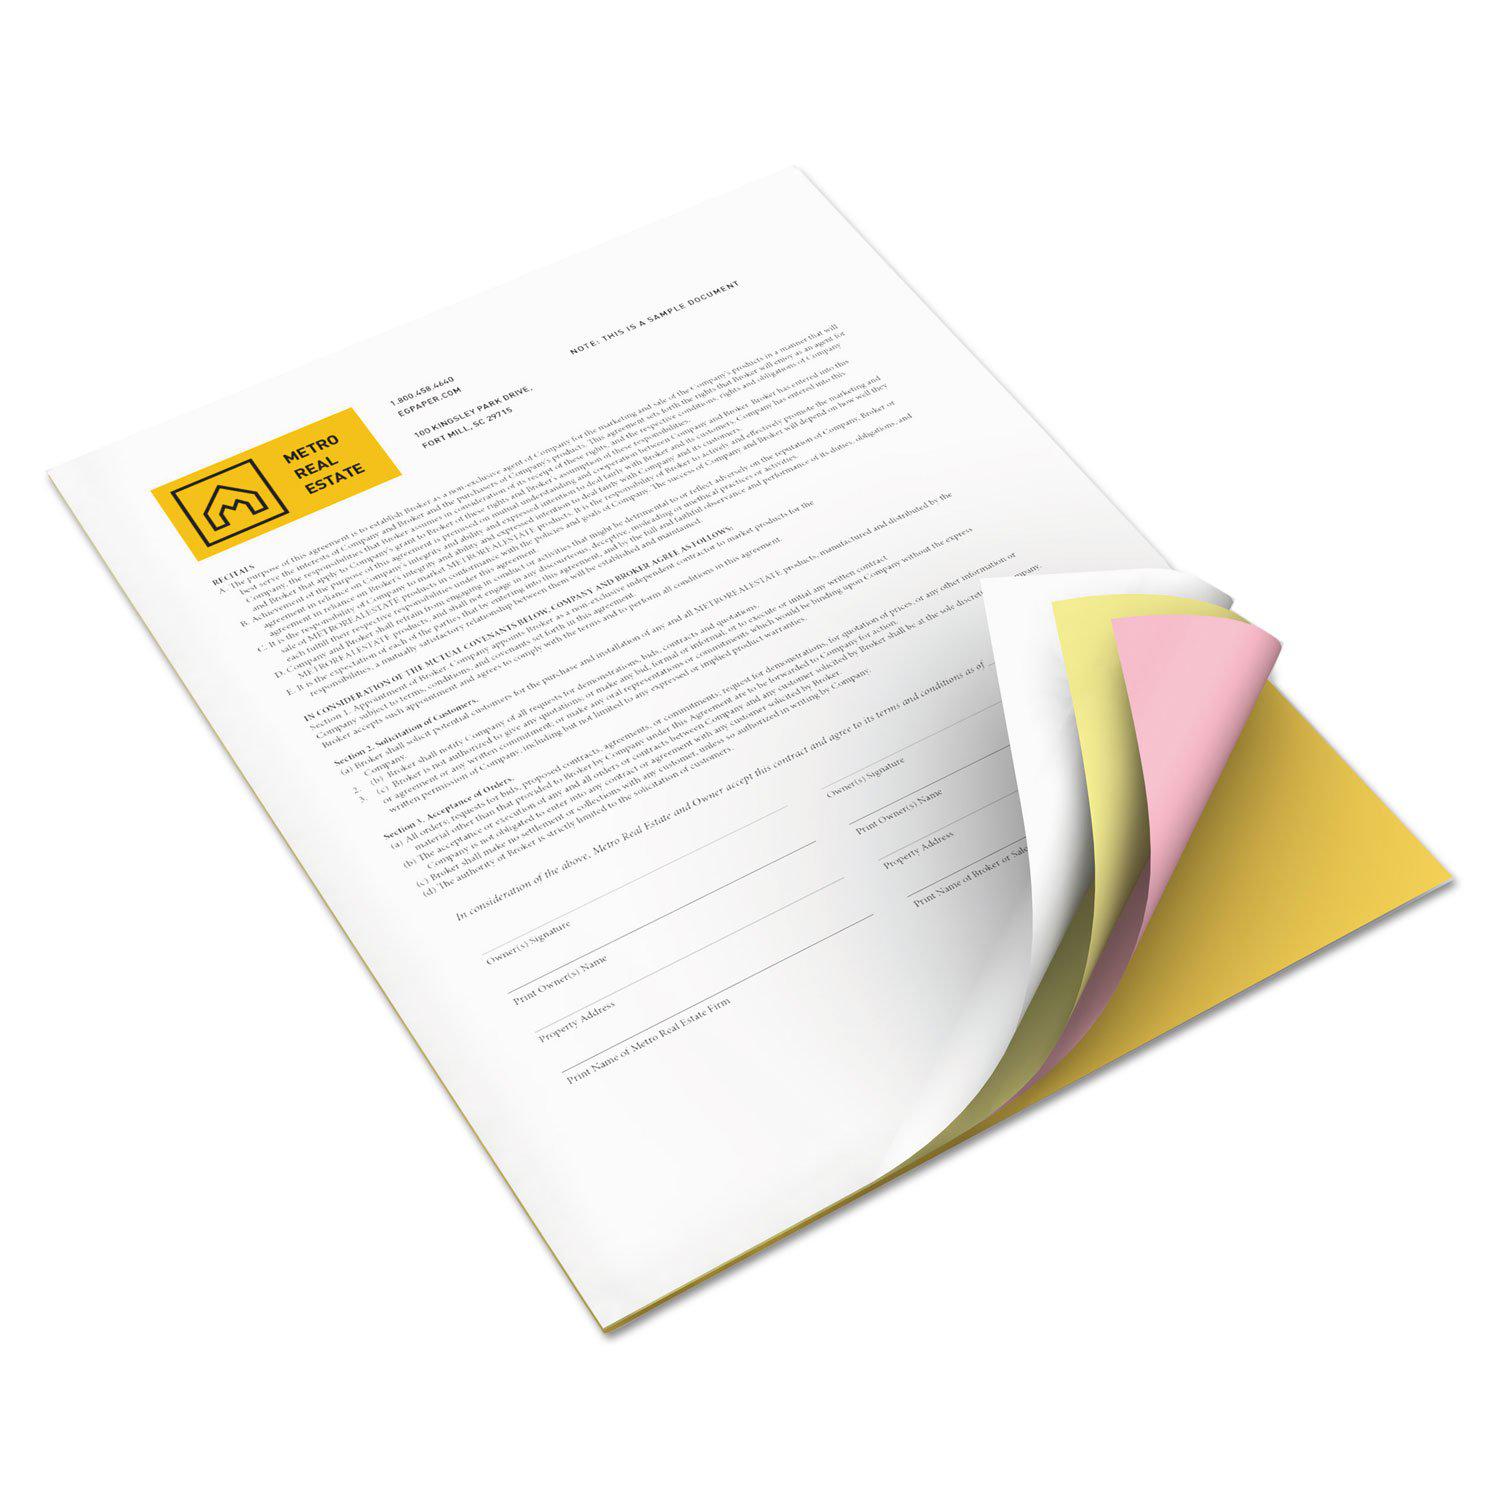 Xerox 3R12856 Carbonless Paper- 4-Part Reverse- Letter- Goldenrod-Pink-Canary-White- 1250 Sets